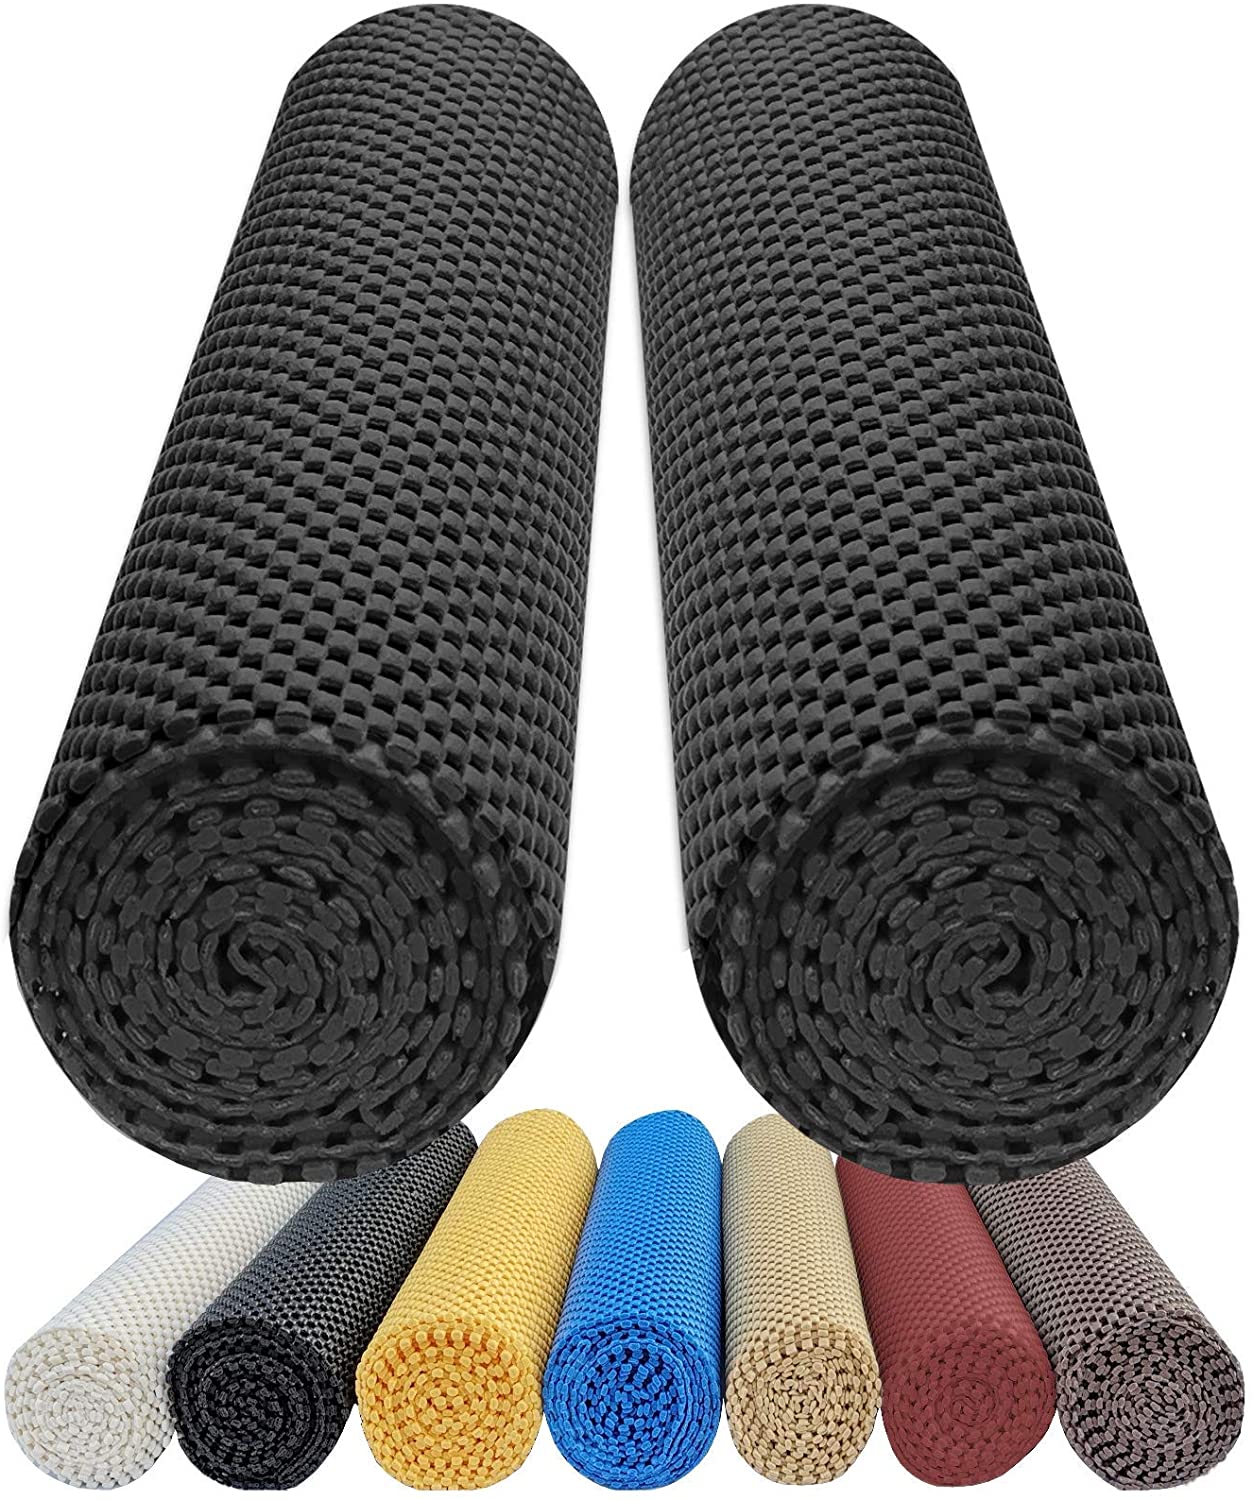 Two Gripper Rolls Extra Thick Rubber Roll 11,600cm2 Non Slip Mat 